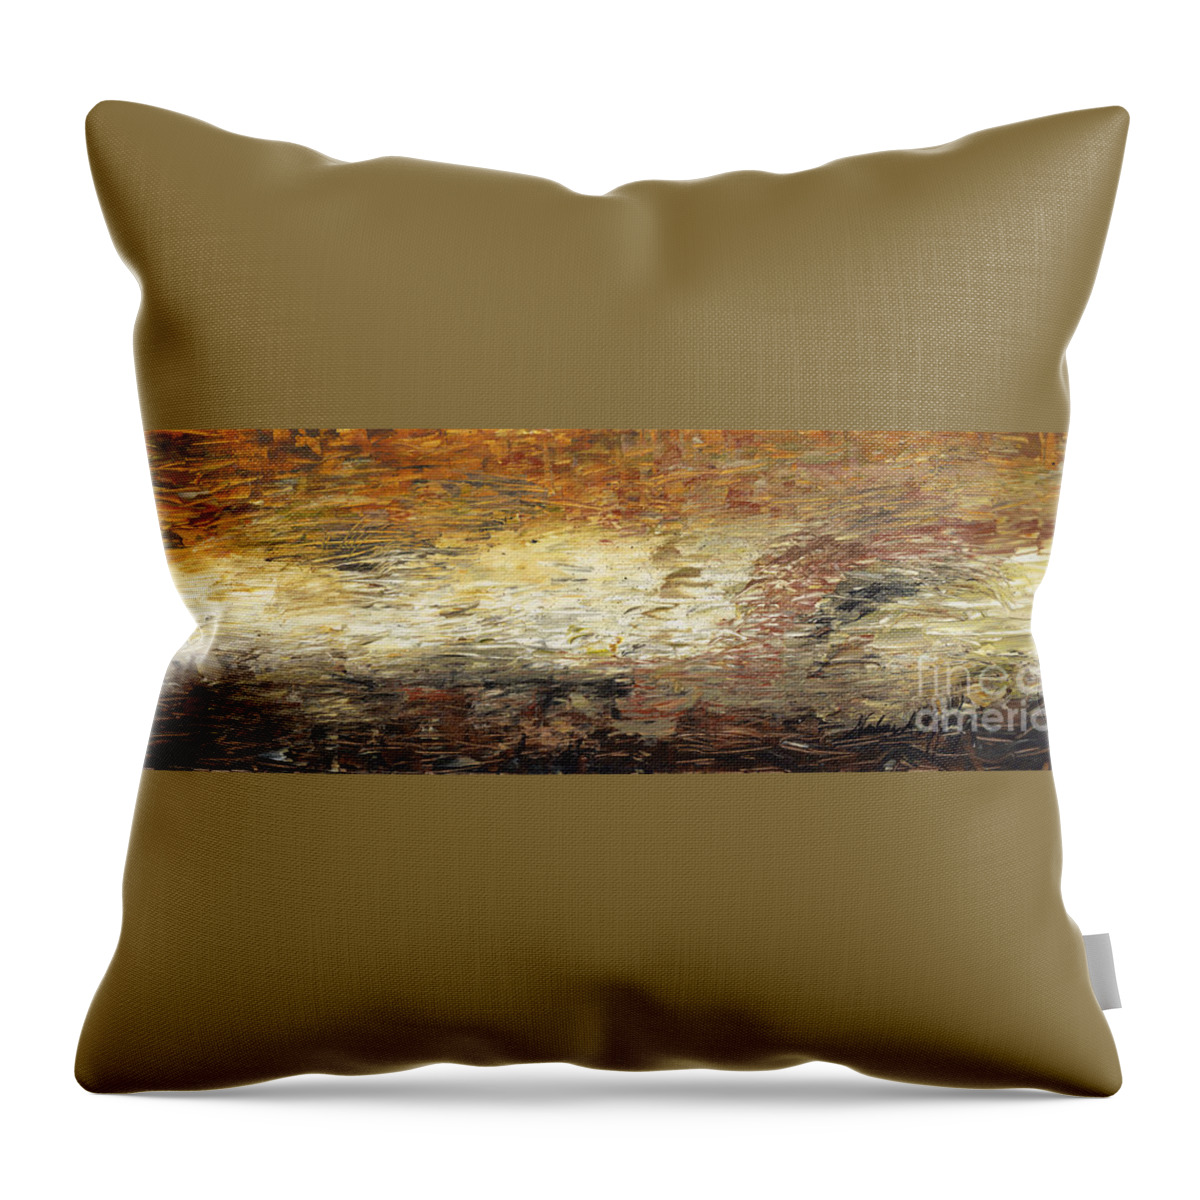 Terra Throw Pillow featuring the painting Terra by Nadine Rippelmeyer